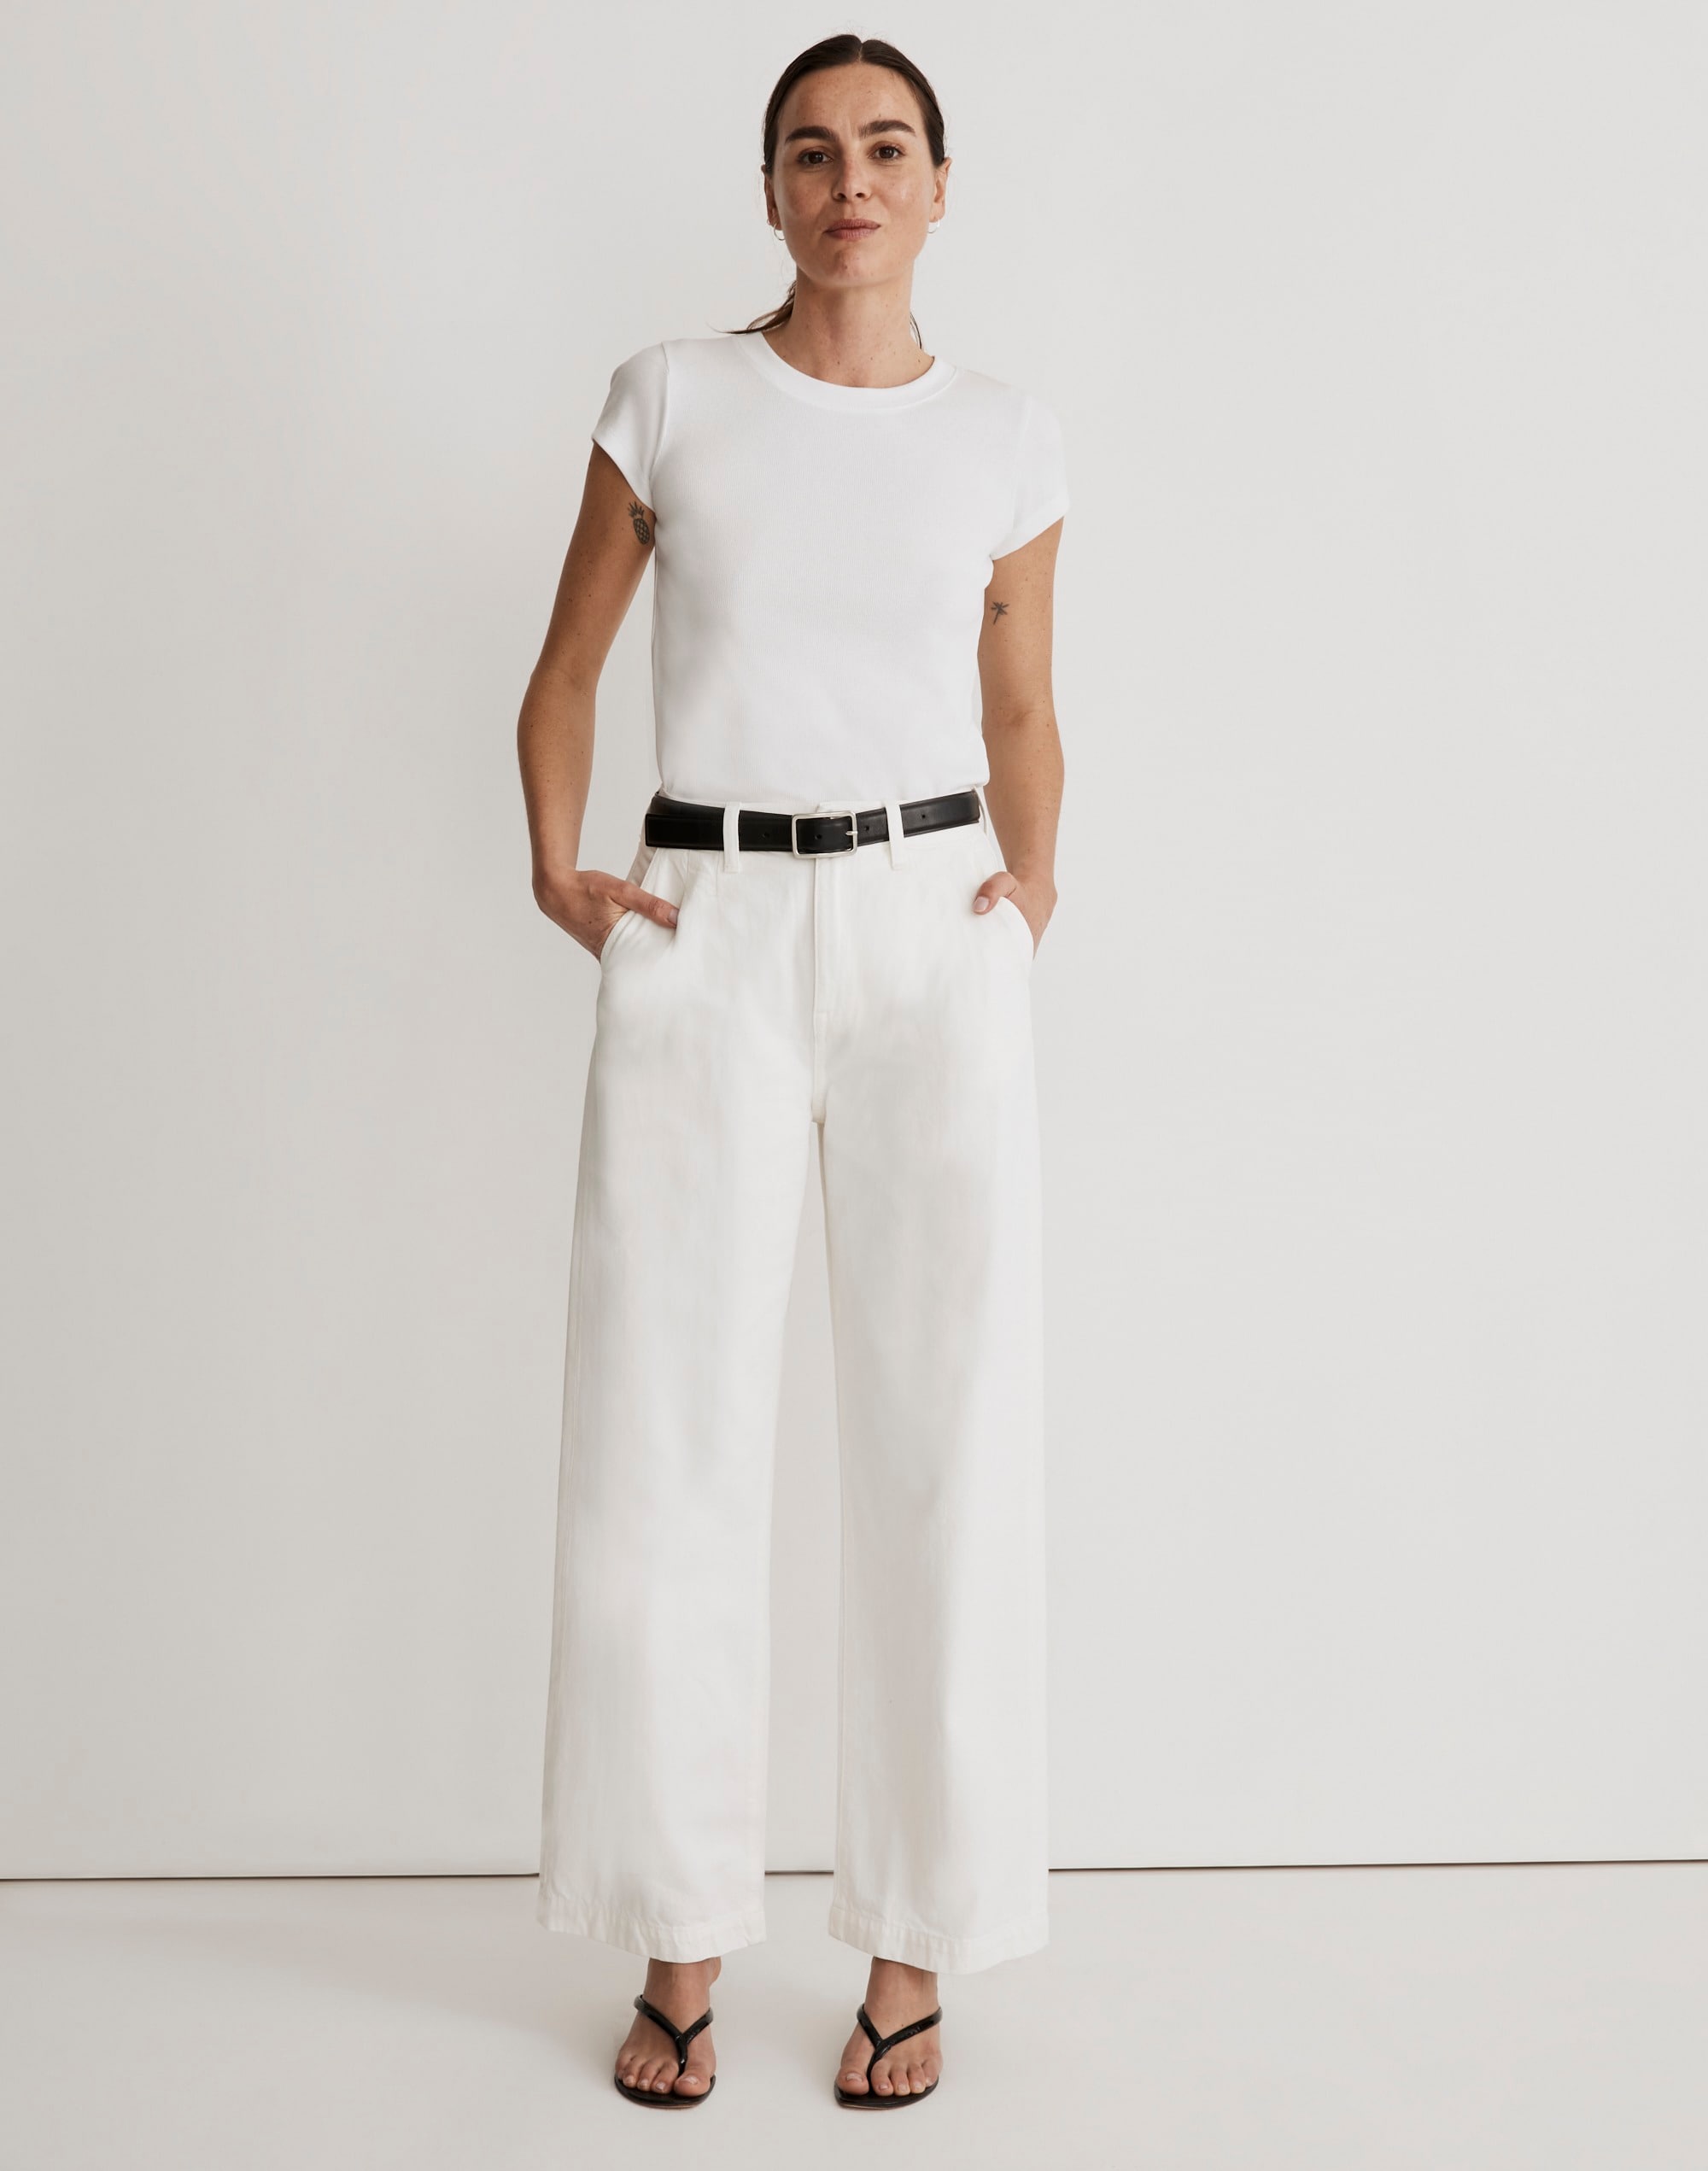 The Harlow Wide-Leg Jean in Tile White